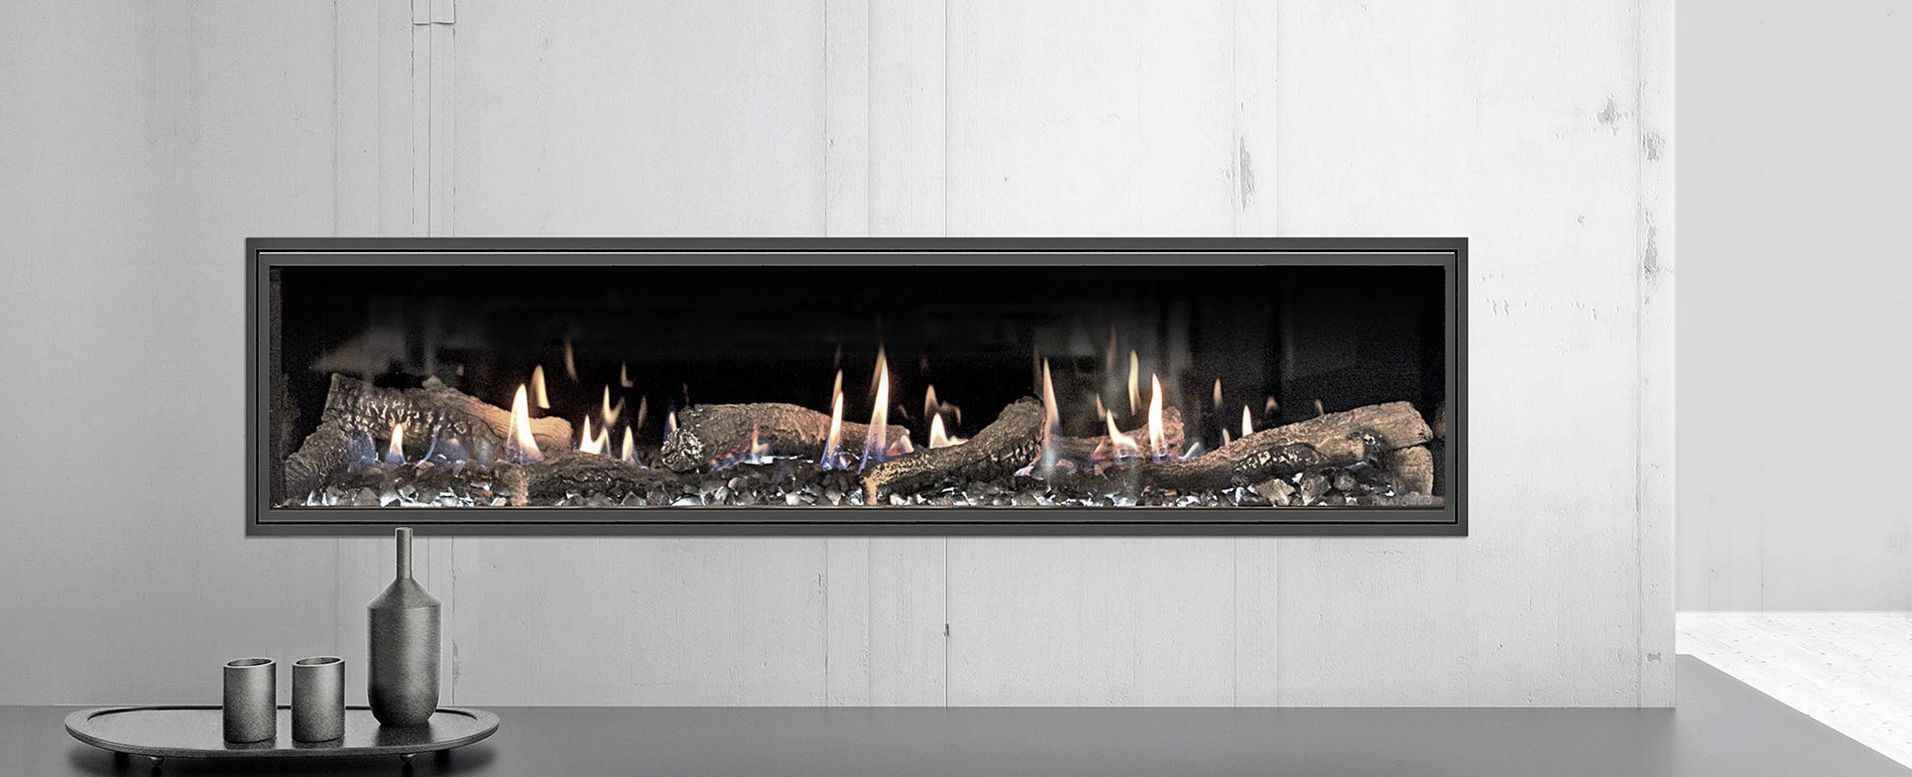 Jetmaster Fireplaces Banner image